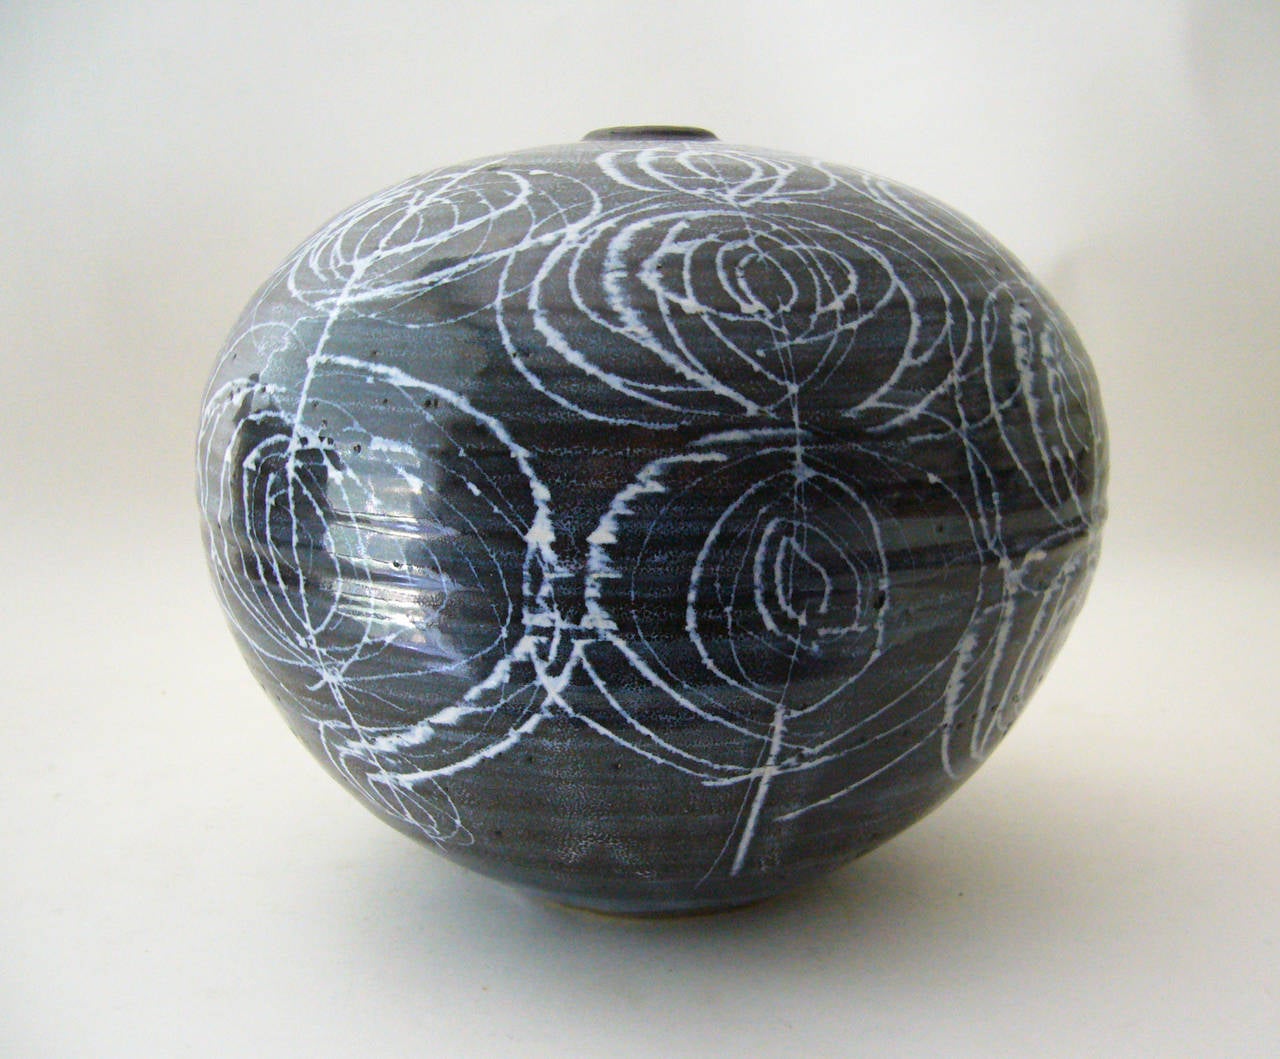 Large stoneware ceramic vase created by J.T. Abernathy of Ann Arbor, Michigan. Piece has a high contrast sgraffito glaze in black and white. Vase measures 8